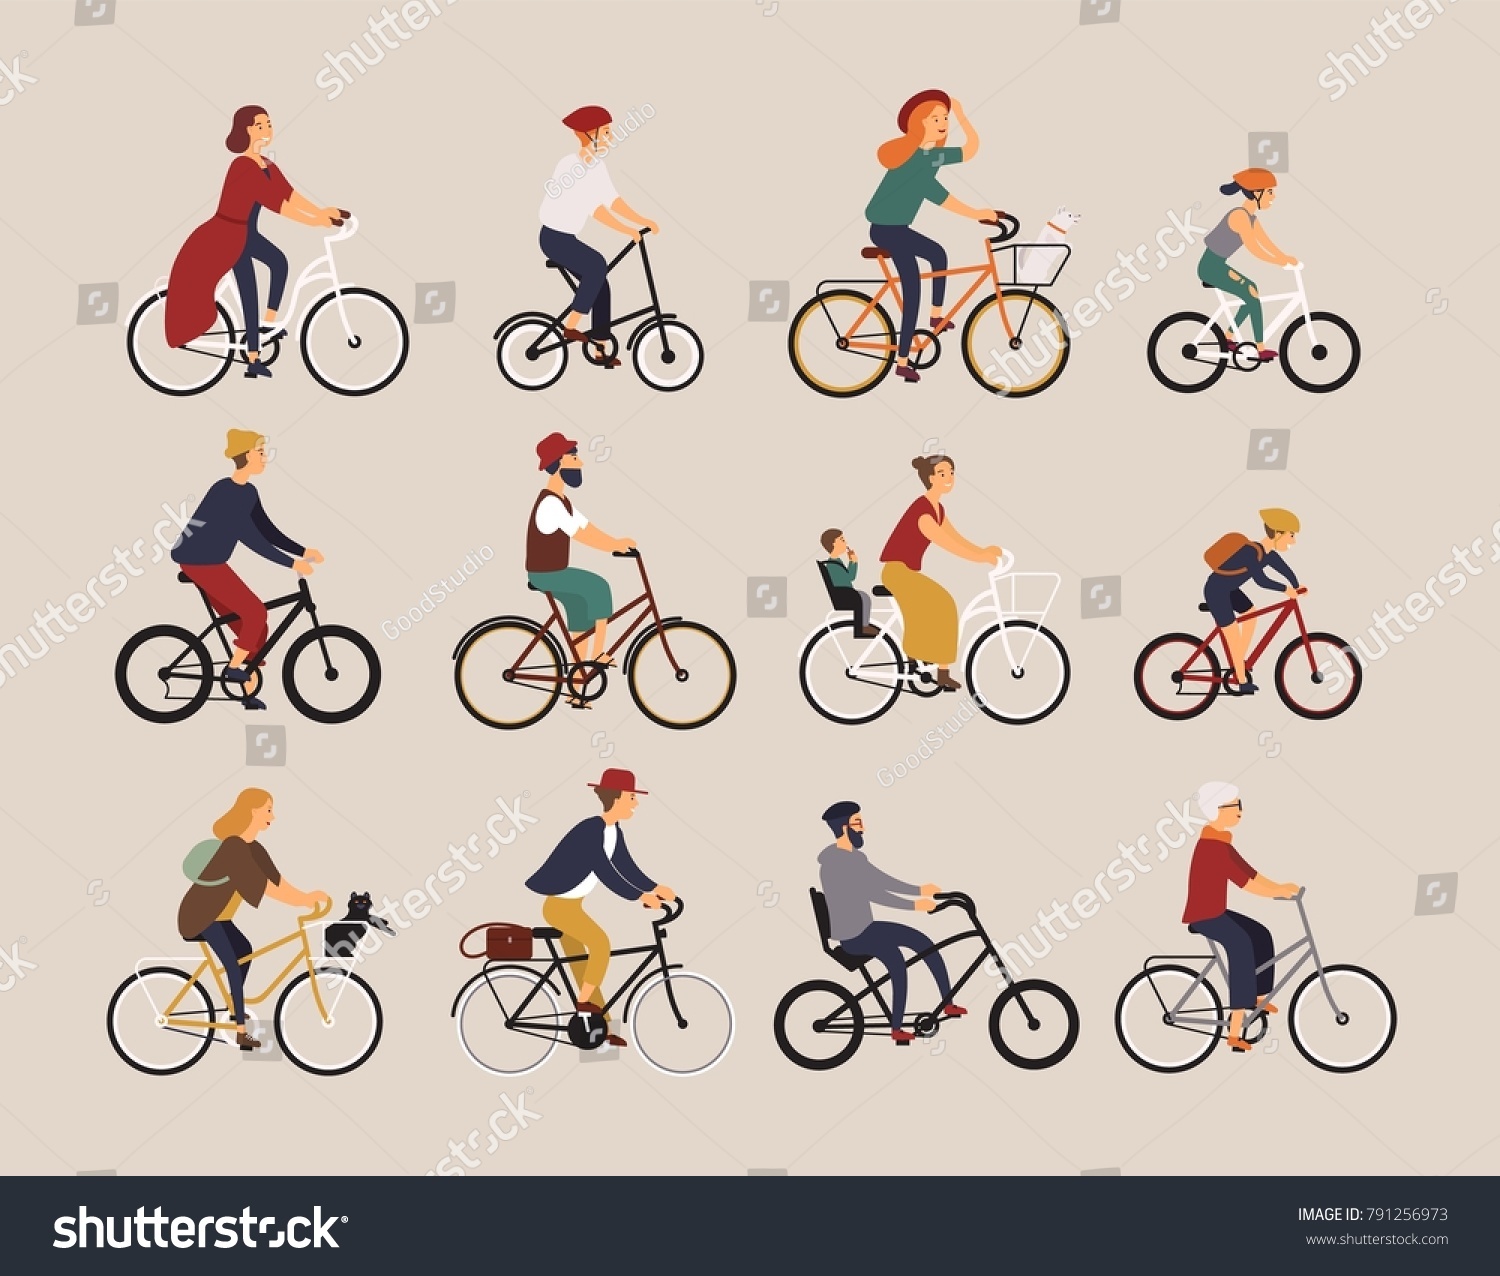 Collection of people riding bicycles of various types - city, bmx, hybrid, chopper, cruiser, single speed, fixed gear. Set of cartoon men, women and children on bikes. Colorful vector illustration. #791256973